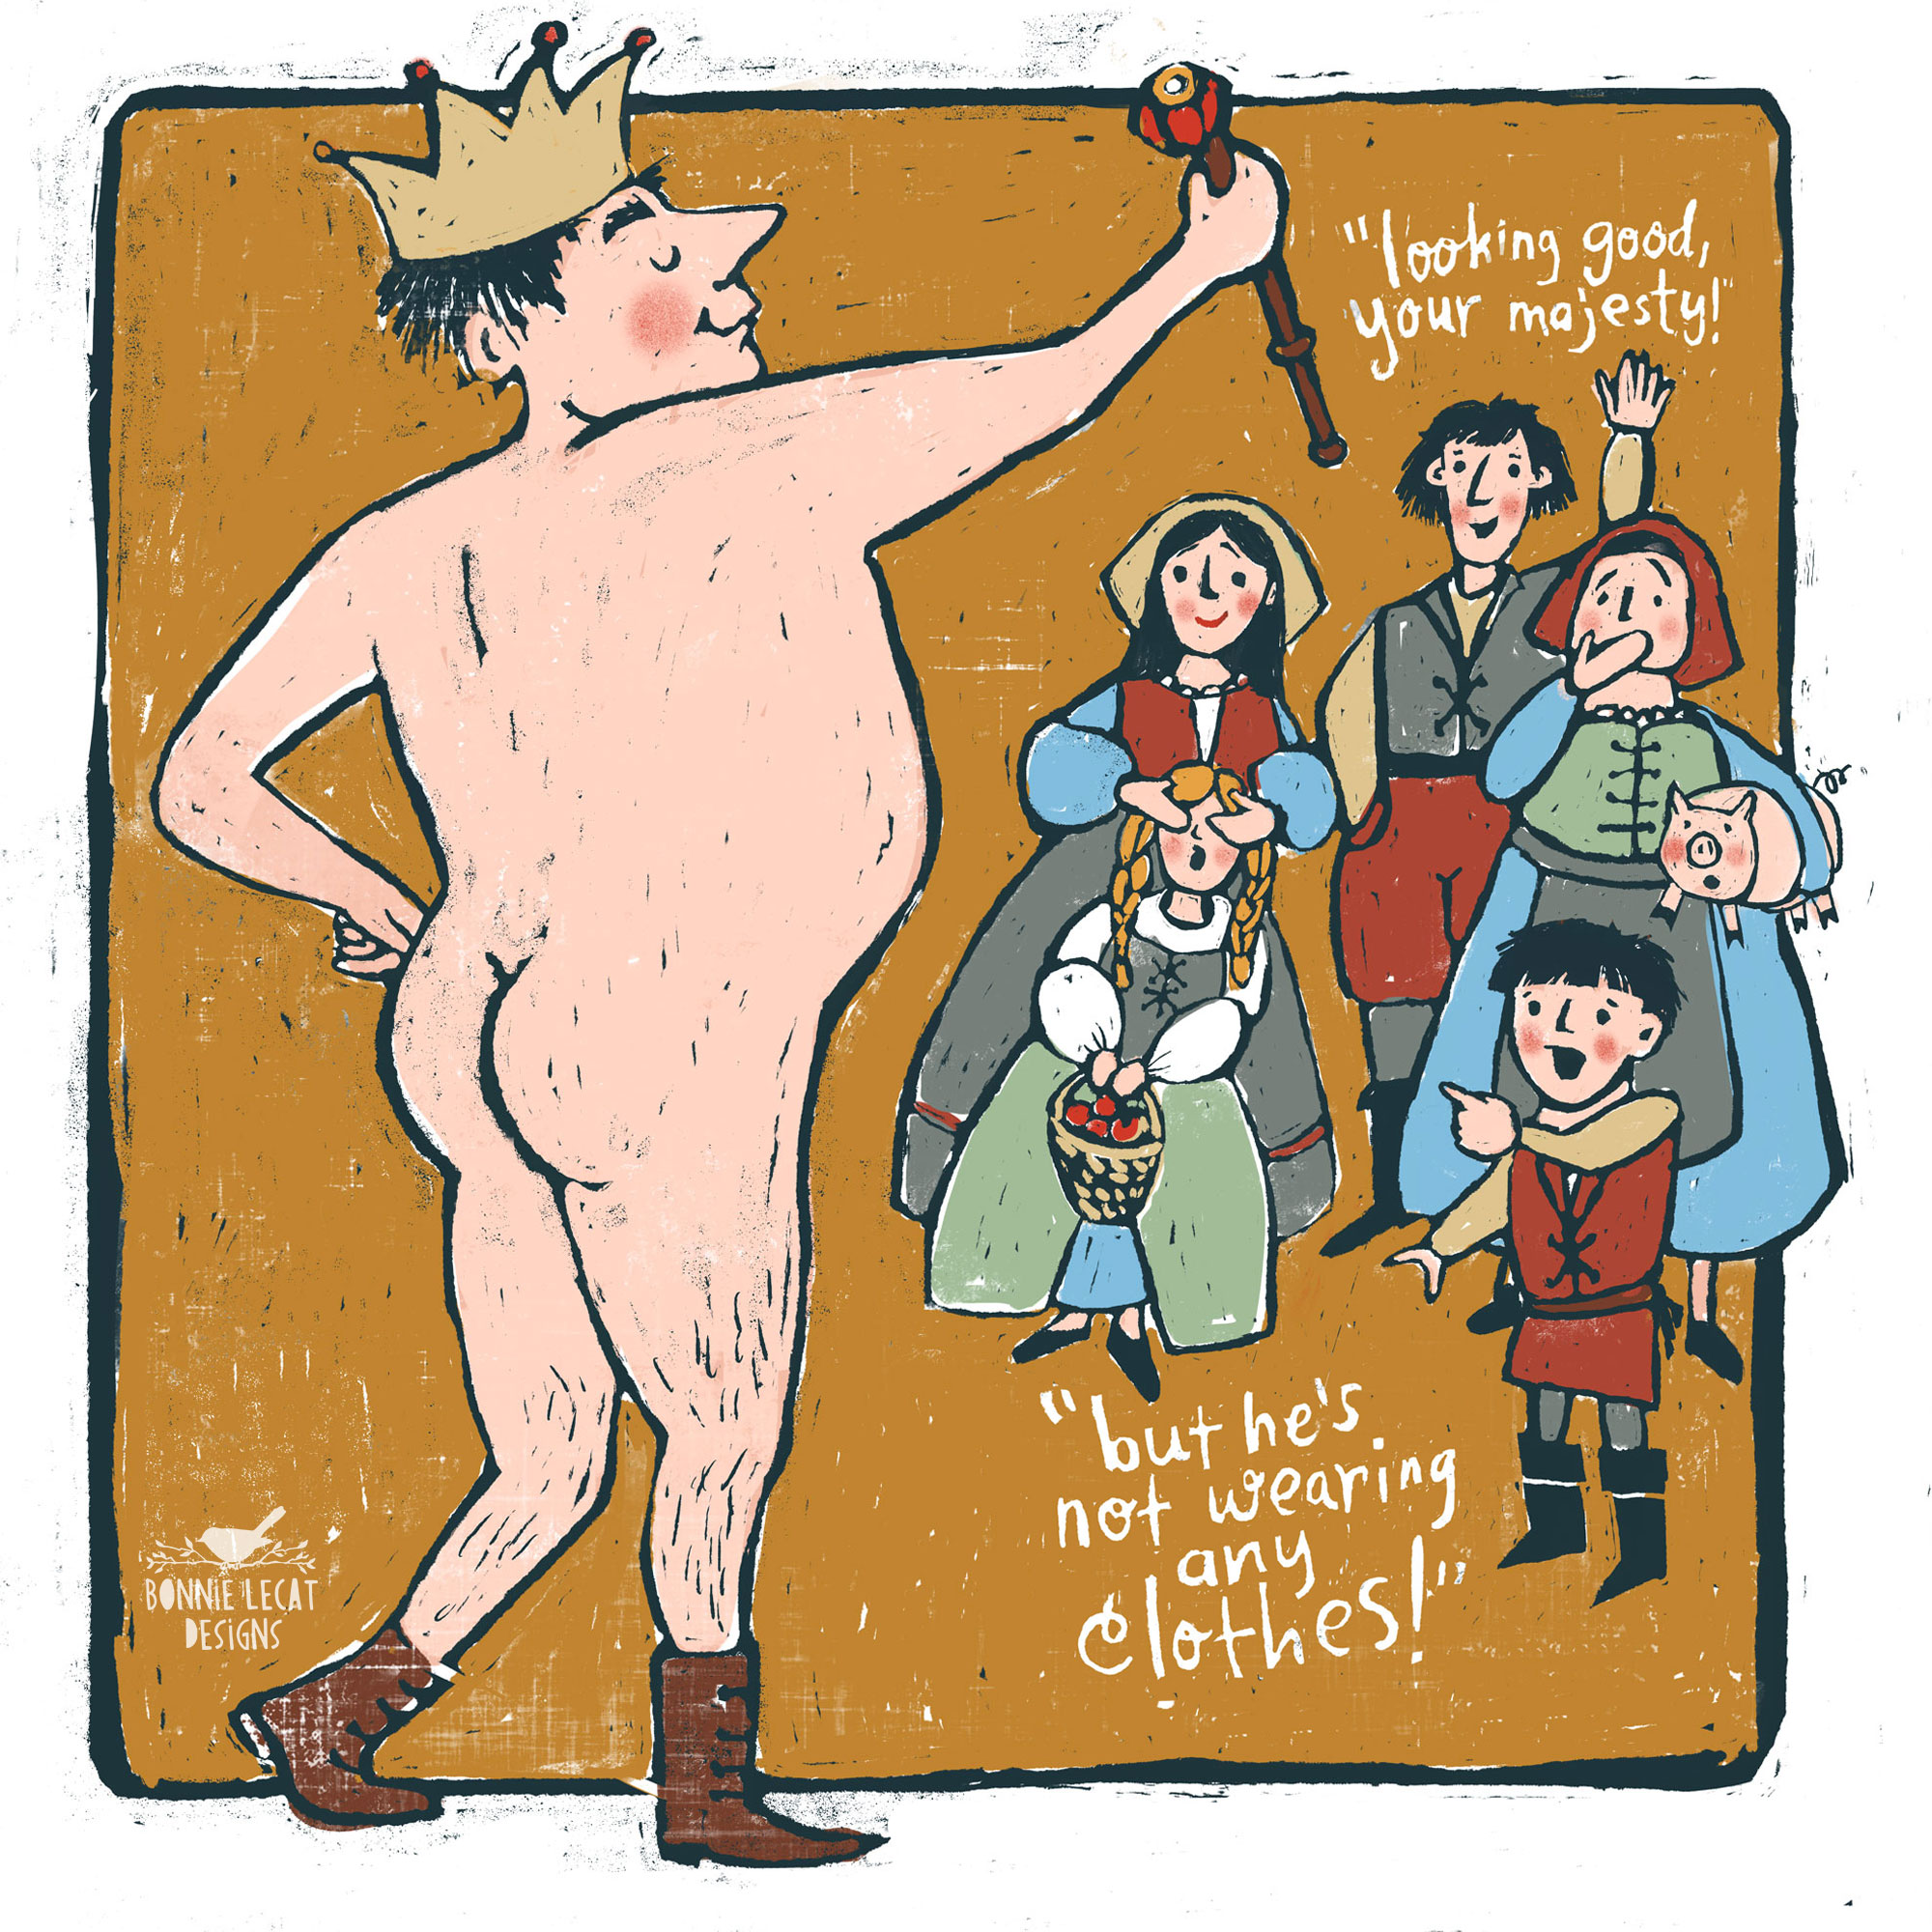 The emperor's new clothes illustration by Bonnie Lecat.